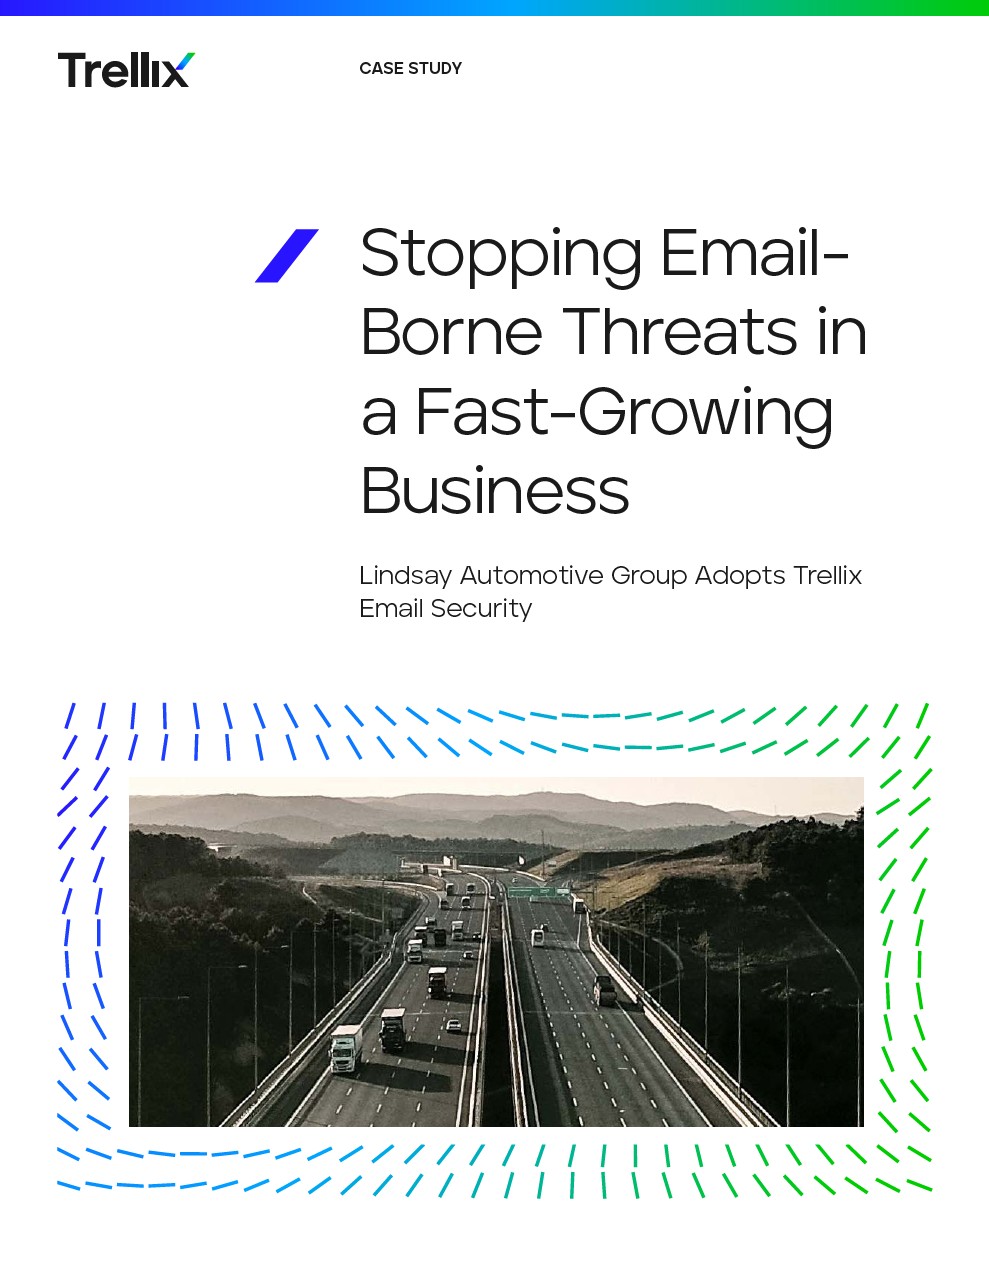 Trellix Case Study - Stopping Email-Borne Threats in a Fast-Growing Business - One Source (MSP) Thumbnail